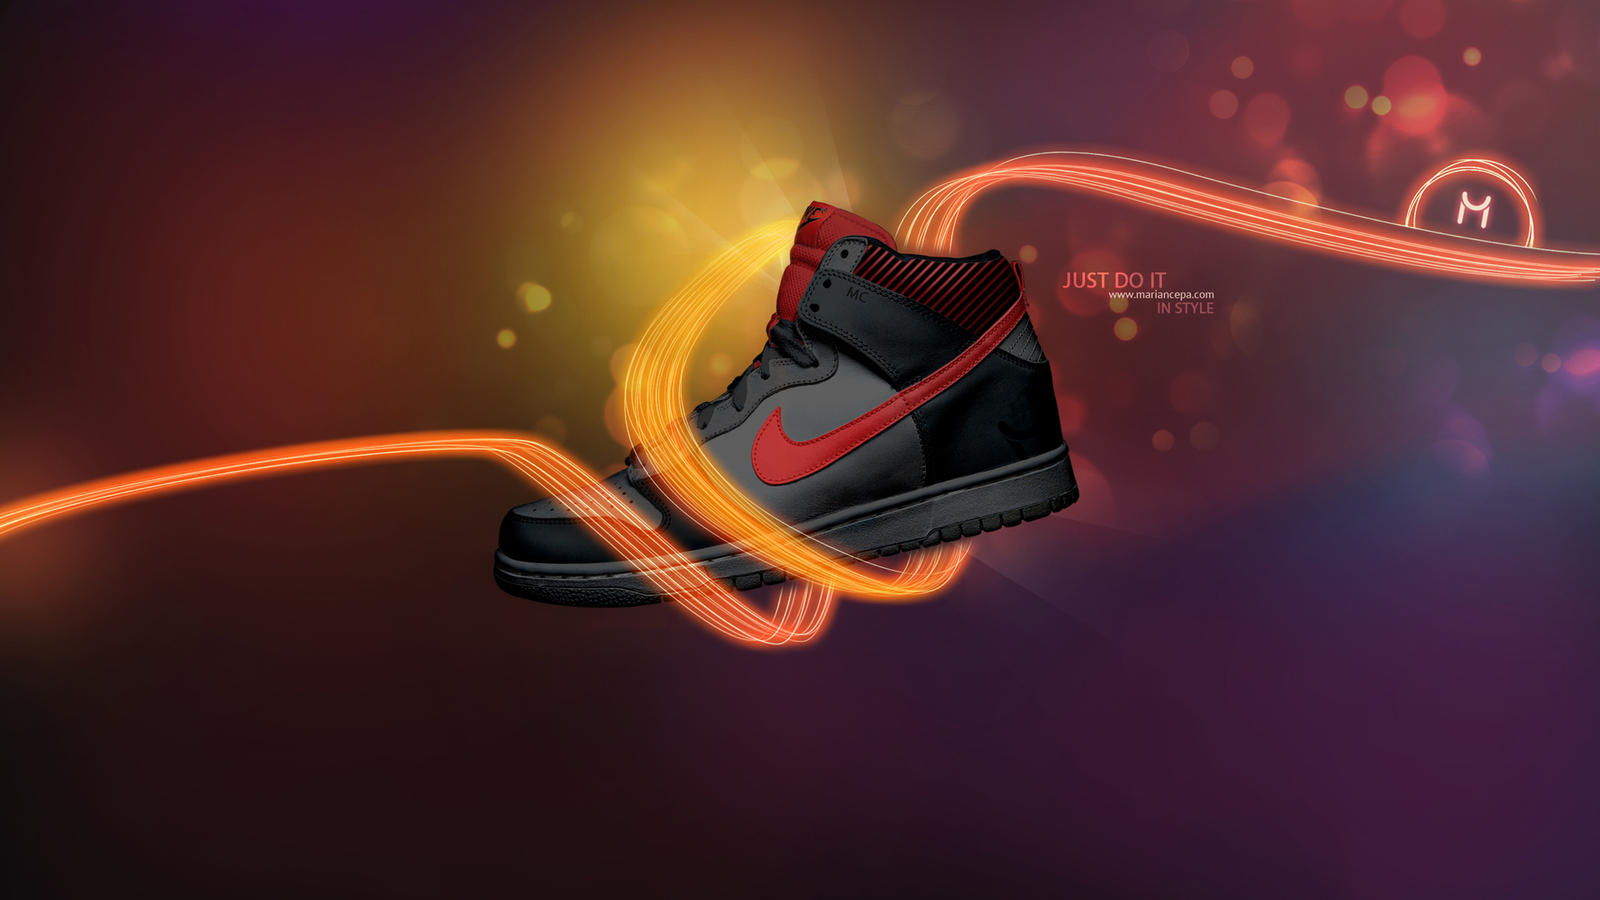 How To Use Gift Card On Nike App?